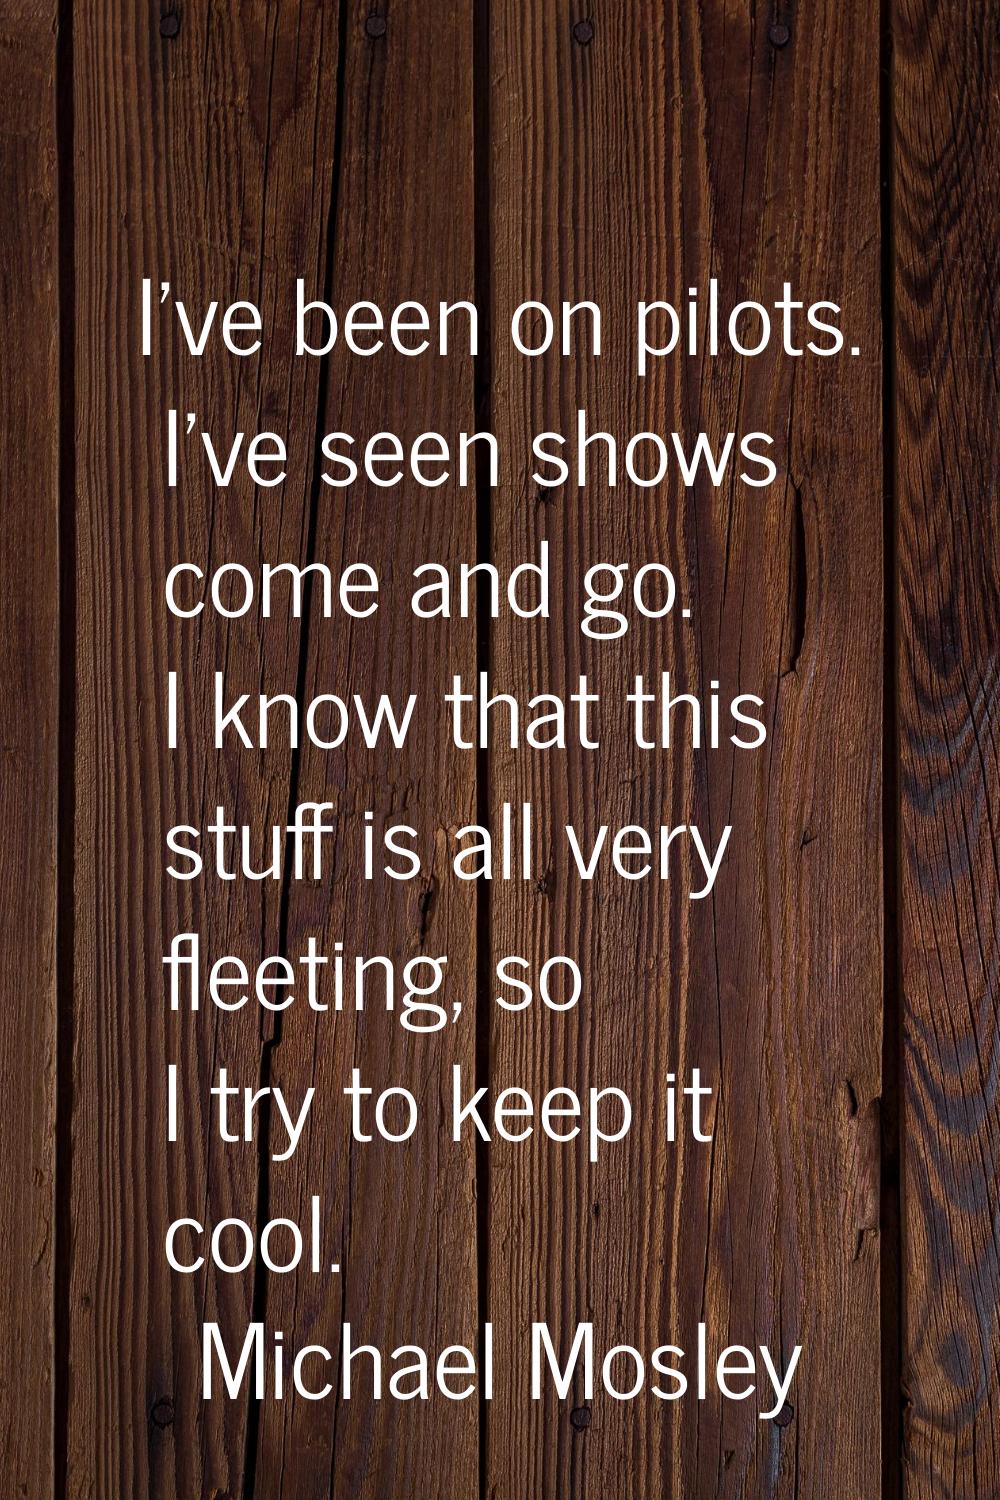 I've been on pilots. I've seen shows come and go. I know that this stuff is all very fleeting, so I